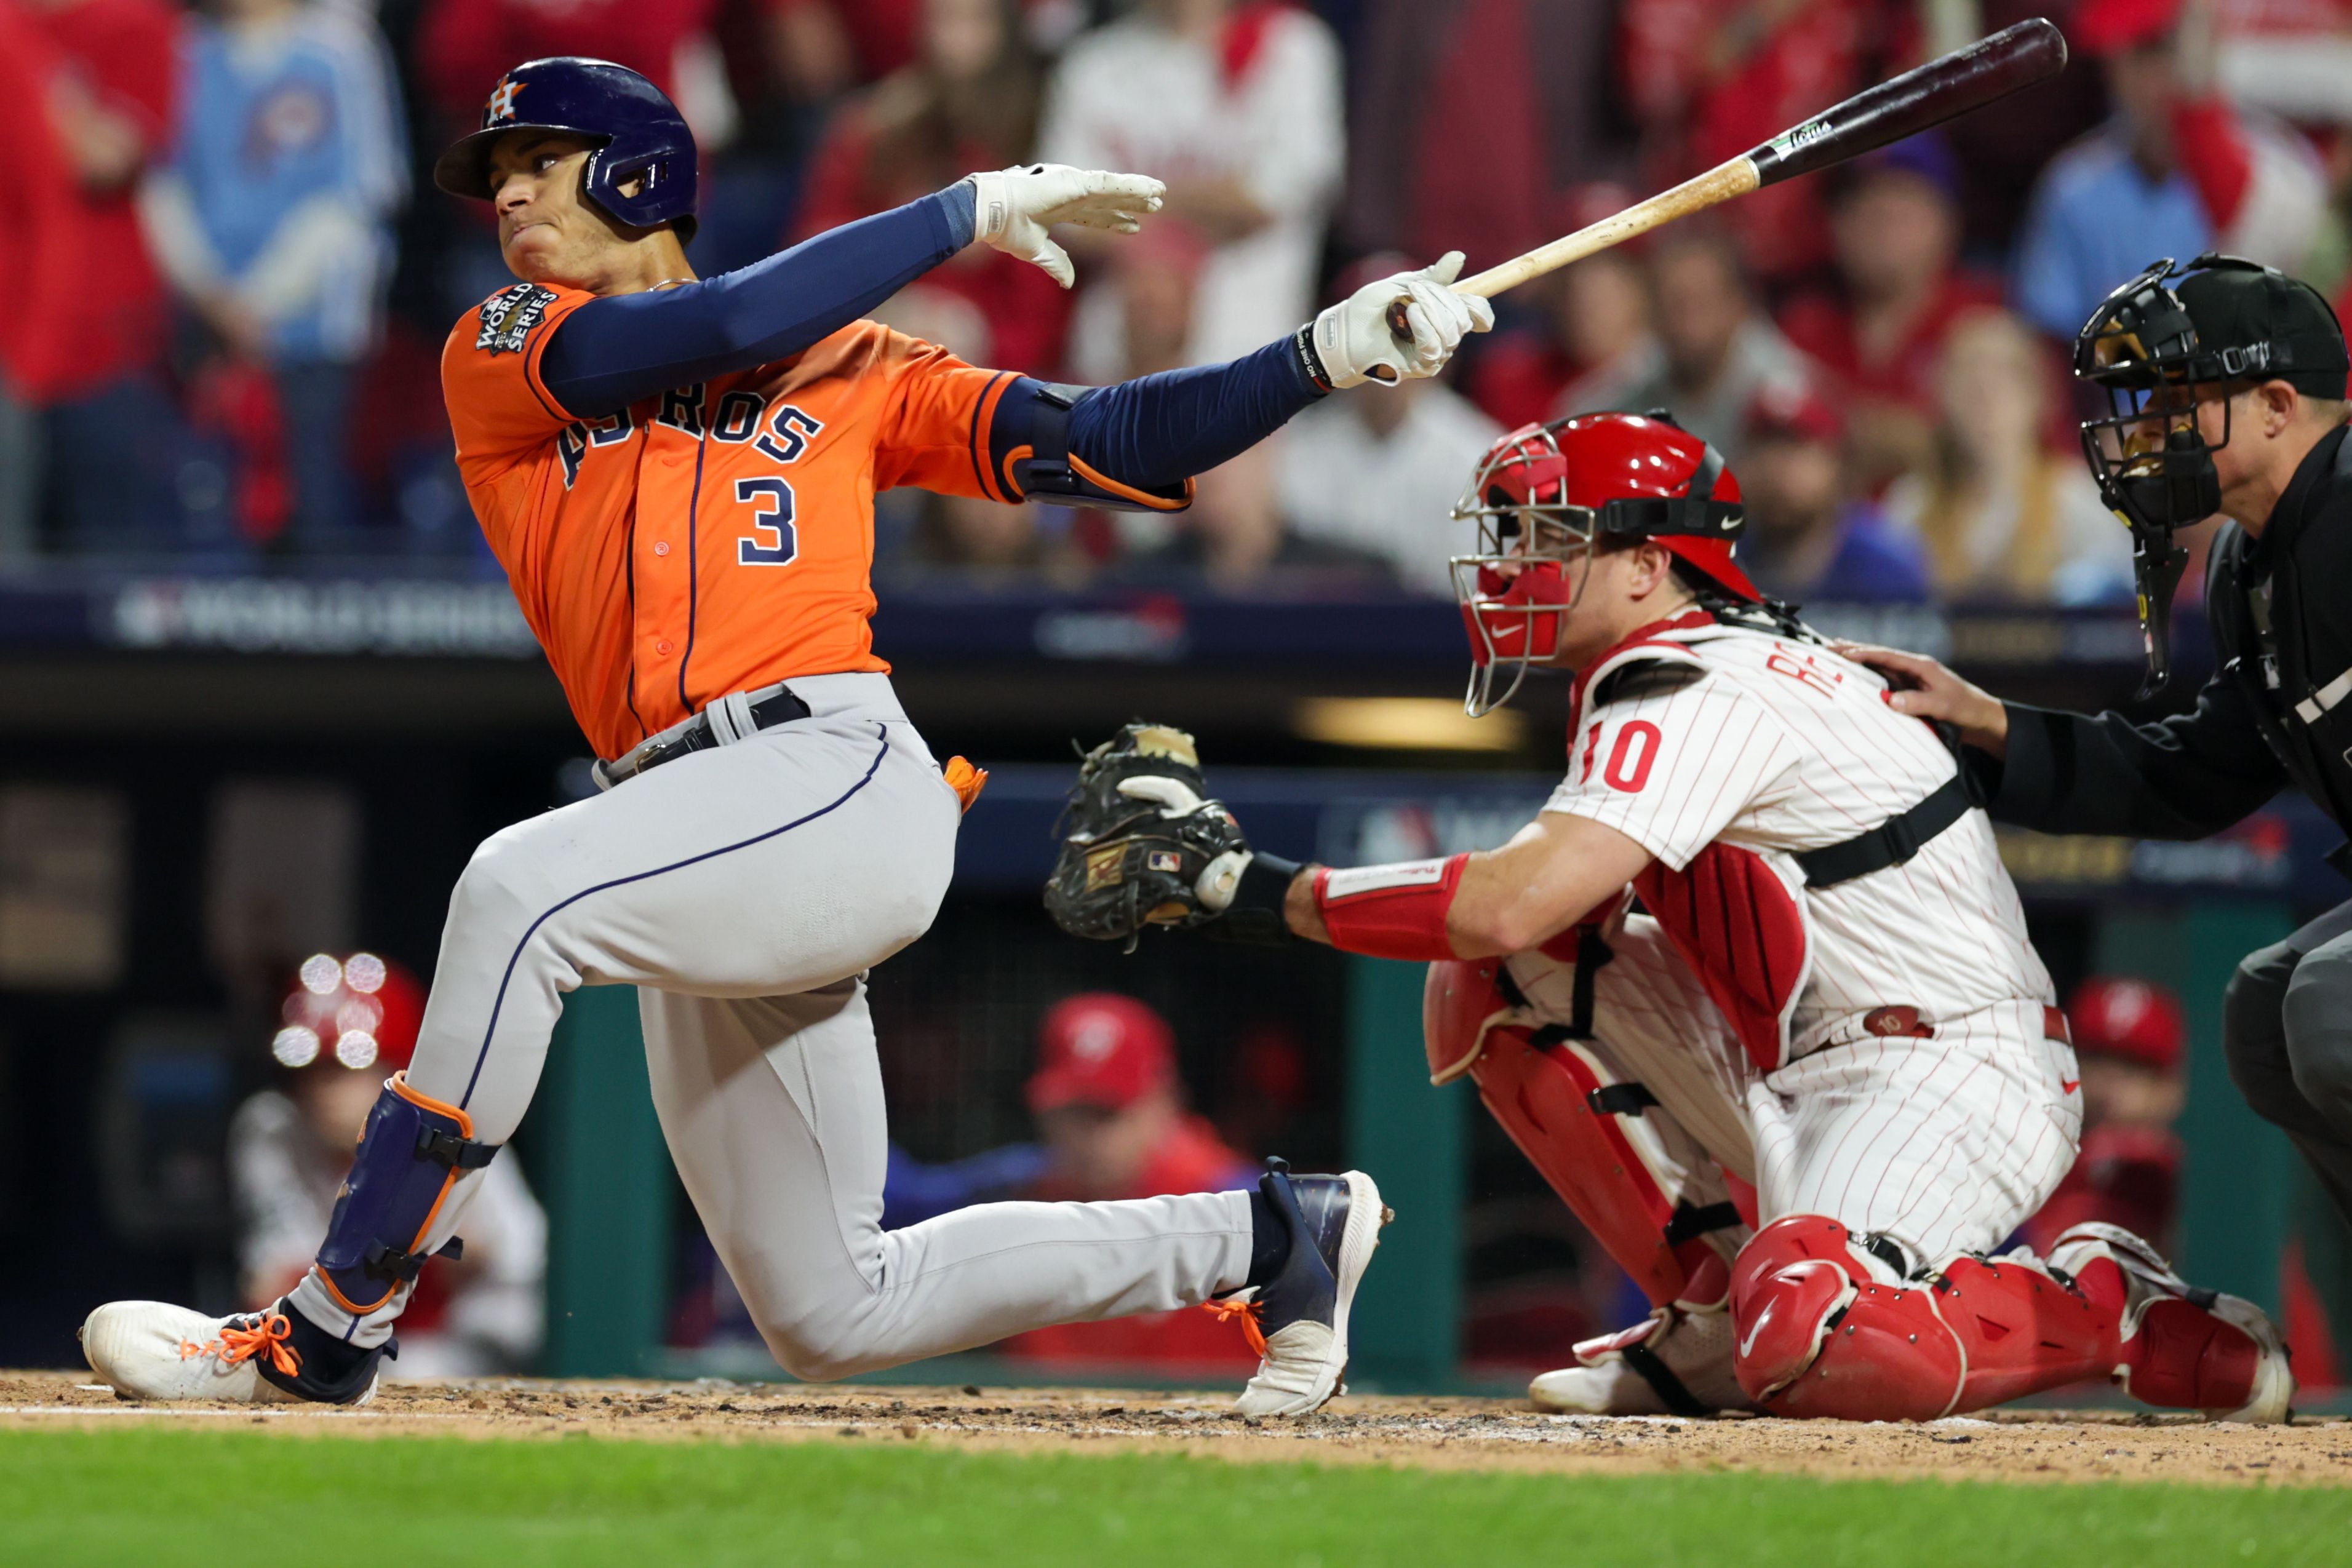 Houston Astros cement dominant run with second World Series title